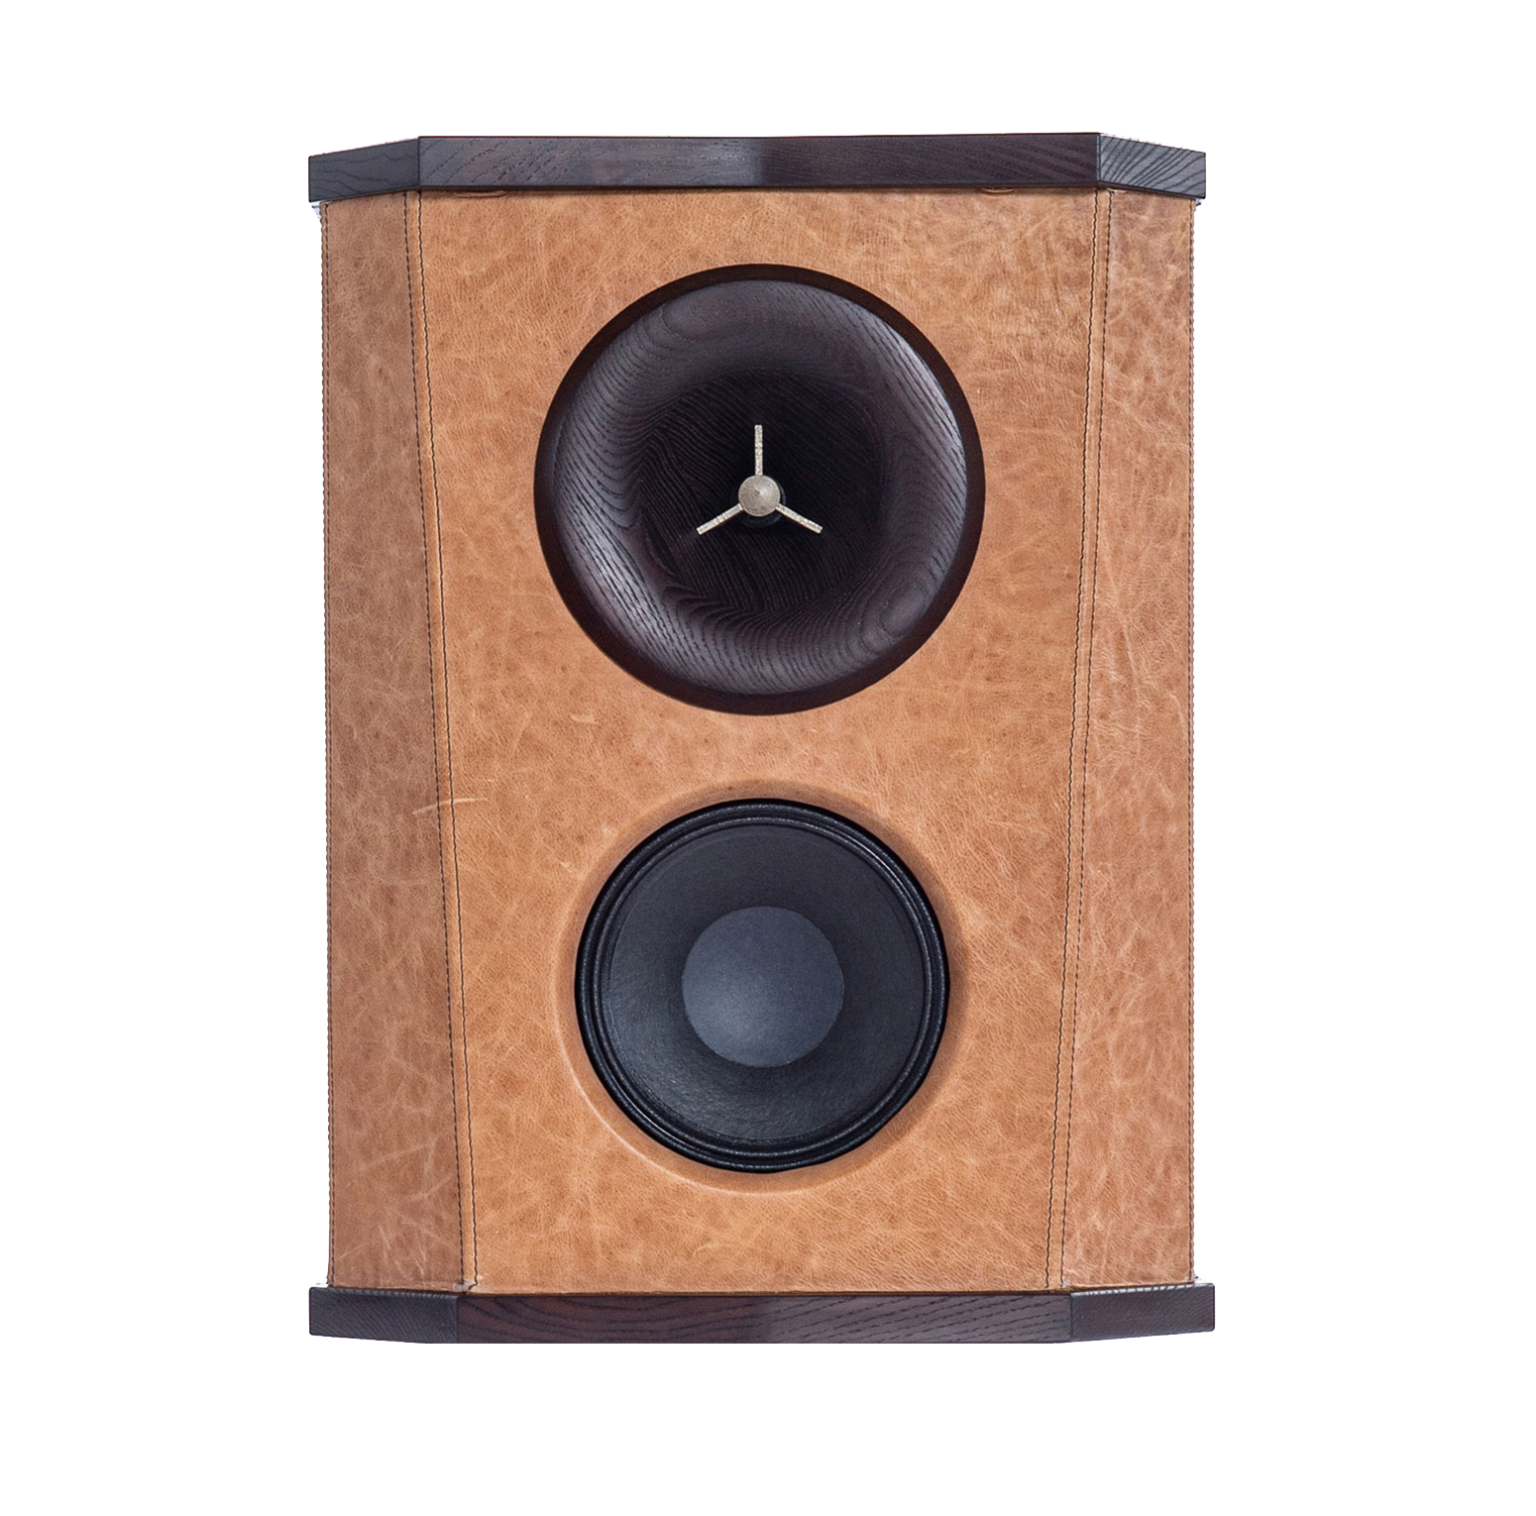 FLEETWOOD DEVILLE SQ LEATHER-WRAPPED SOLID HARDWOOD BODY SPEAKERS. The DeVille SQ (Superior Quality) is the ultimate DeVille. The entire enclosure is made out of solid Pennsylvania ash, either natural (light color) or torrefied (roasted) in either light, medium or dark. The phase plug is cast from a 3D printed sand mold in solid bronze, then patinated, polished and lacquered.